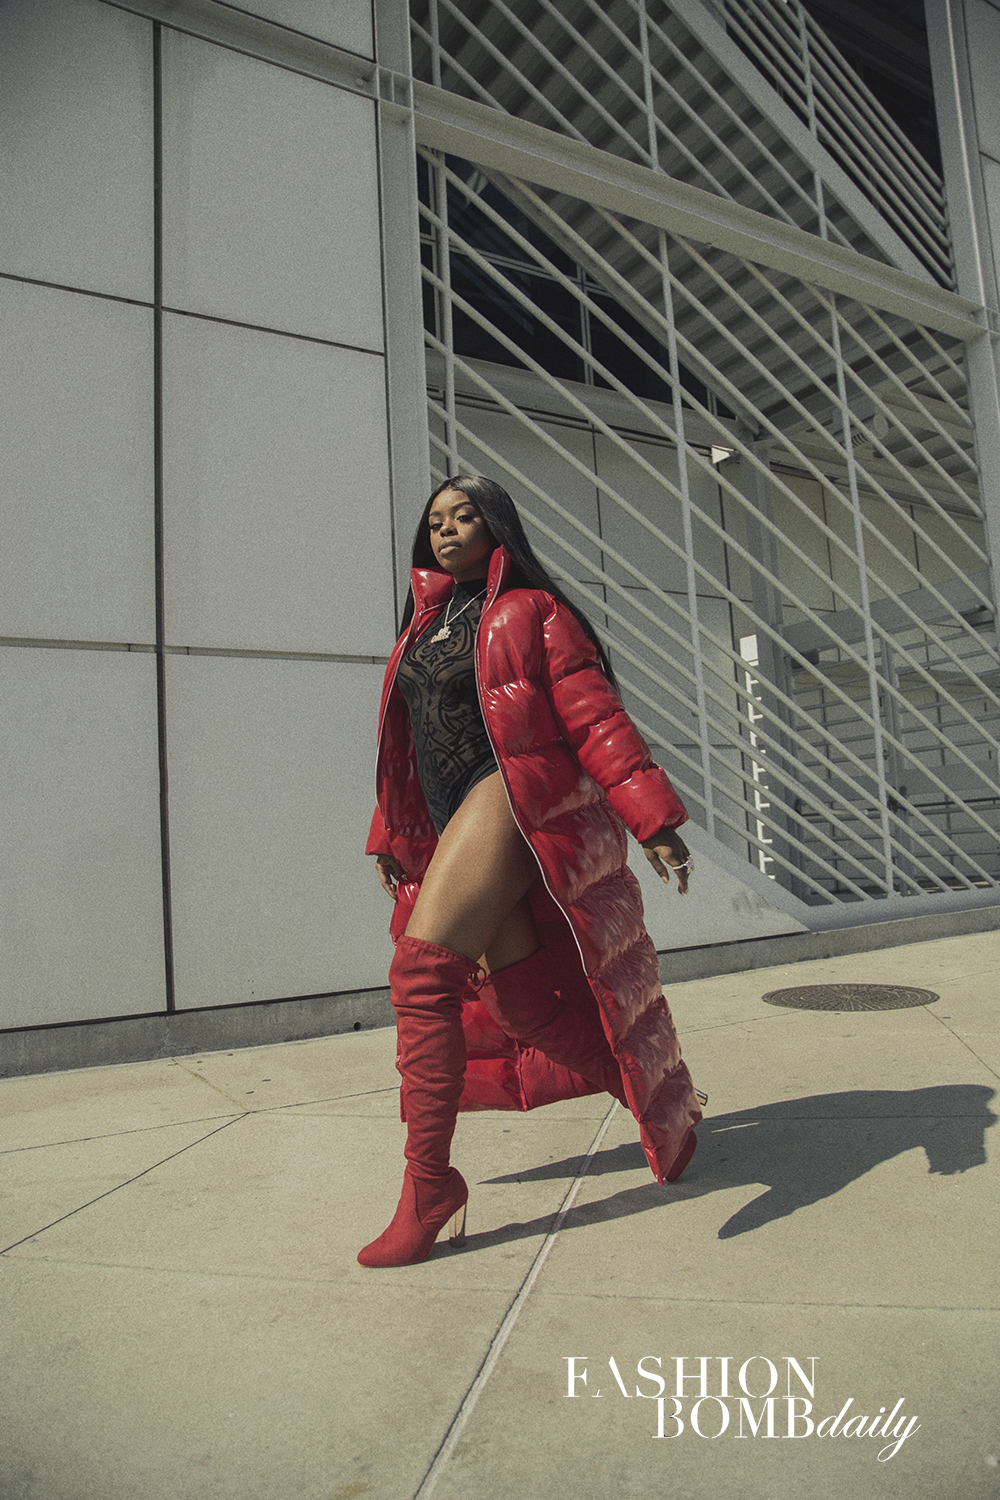 Fashion Bomb Exclusive Editorial: Dreezy Styled by E Burns for Fashion